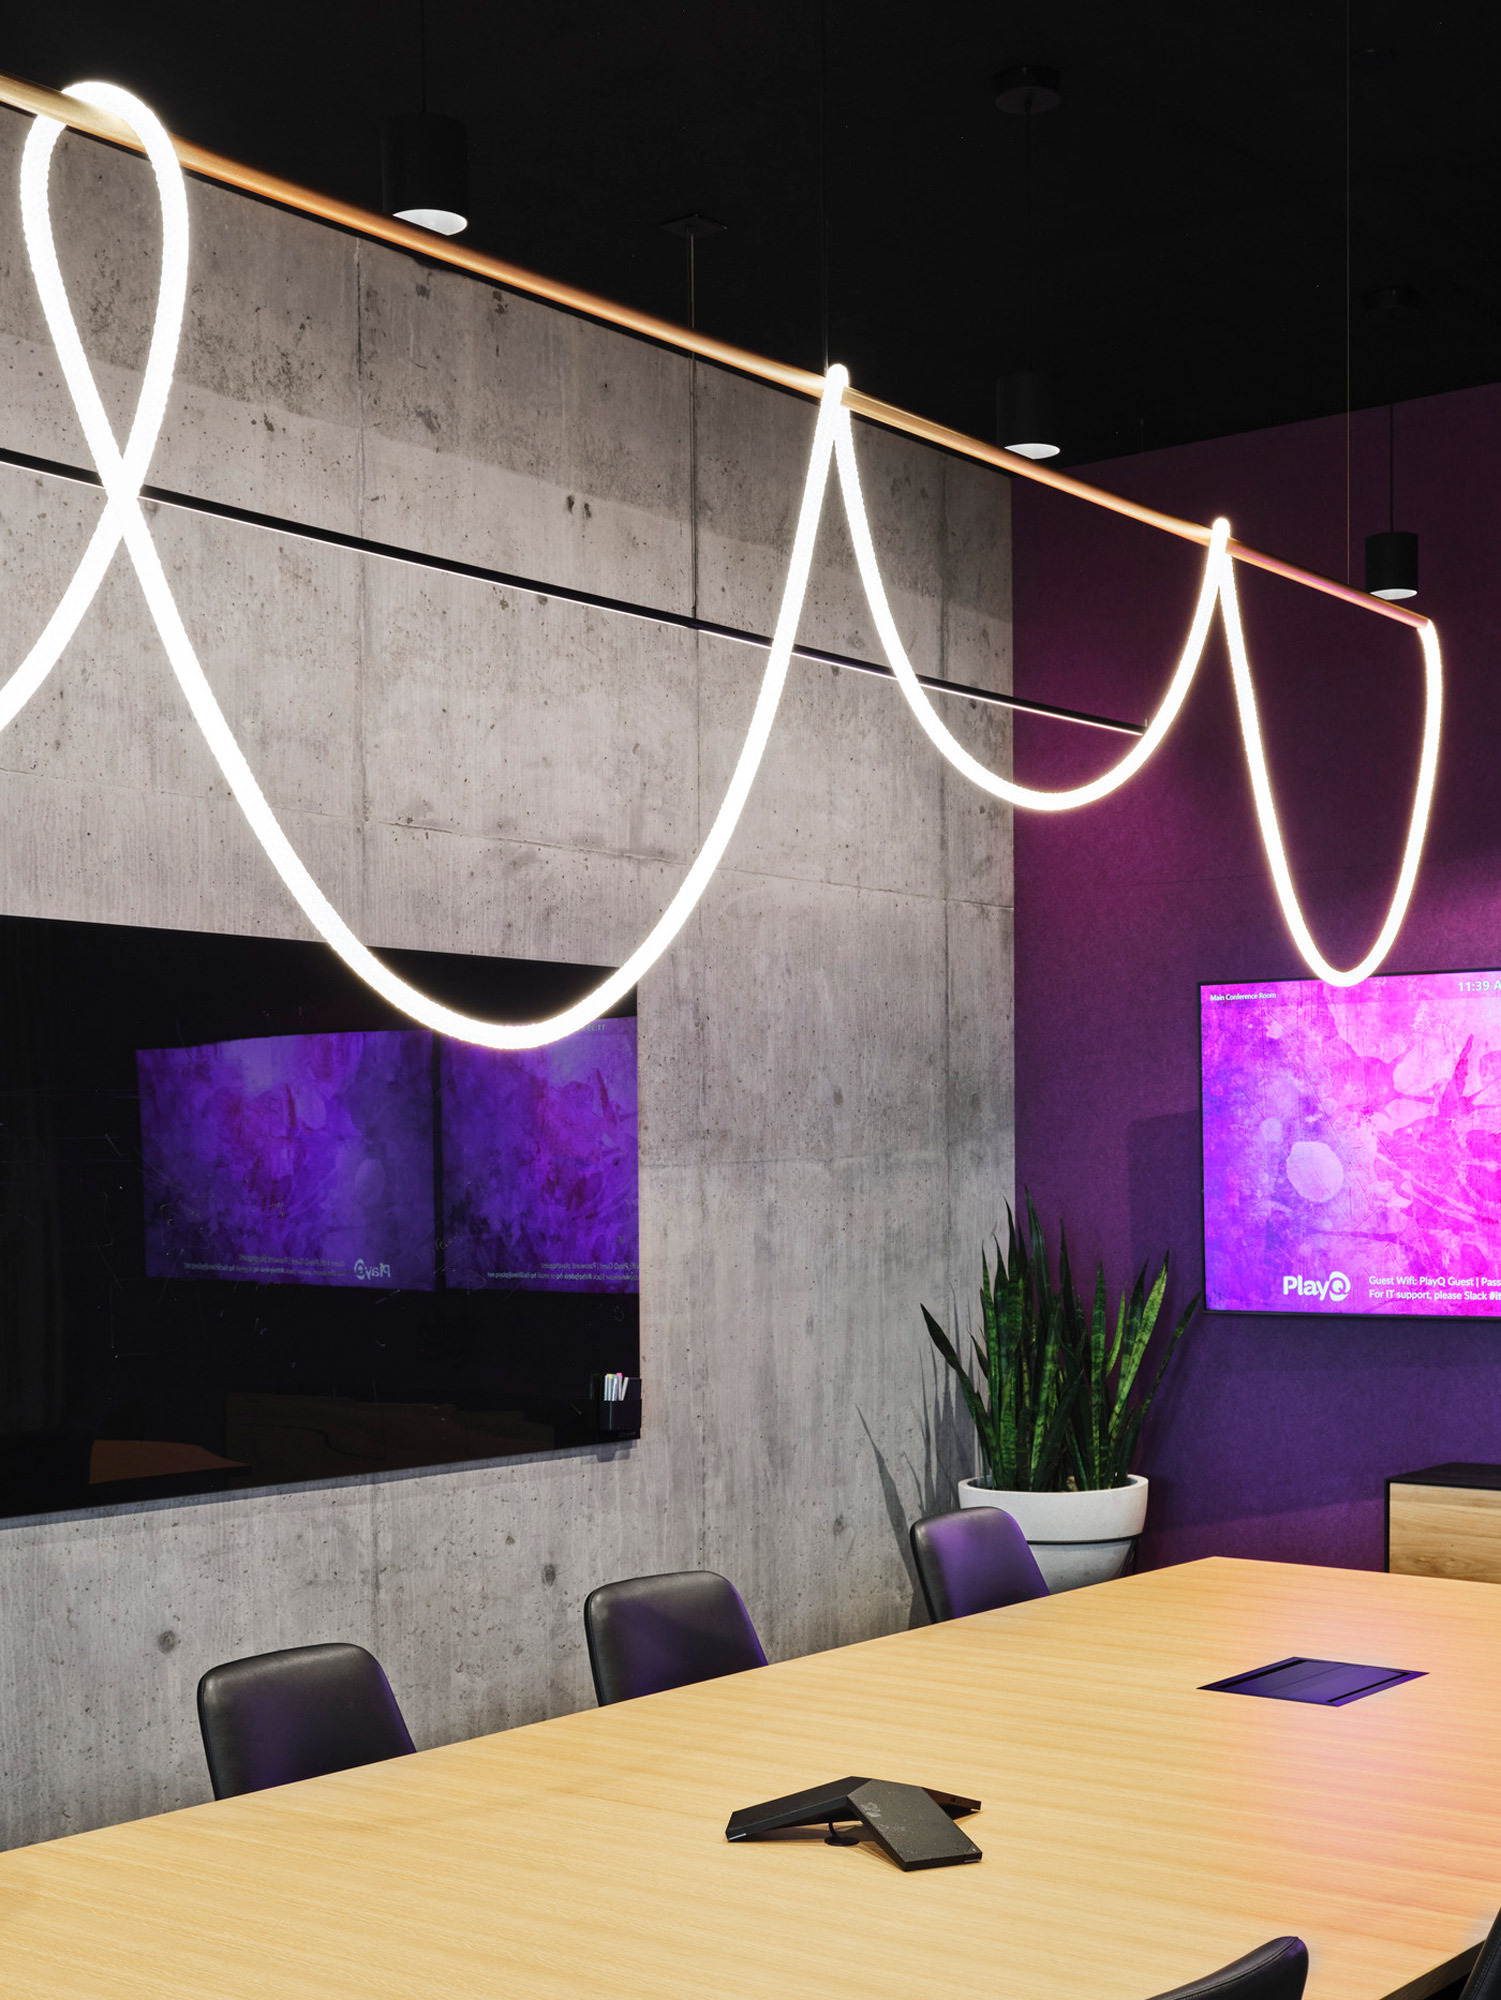 Modern conference room featuring a bold, organic LED lighting fixture above a wooden table, with concrete walls, integrated technology, and vibrant purple accent lighting adding a dynamic atmosphere.